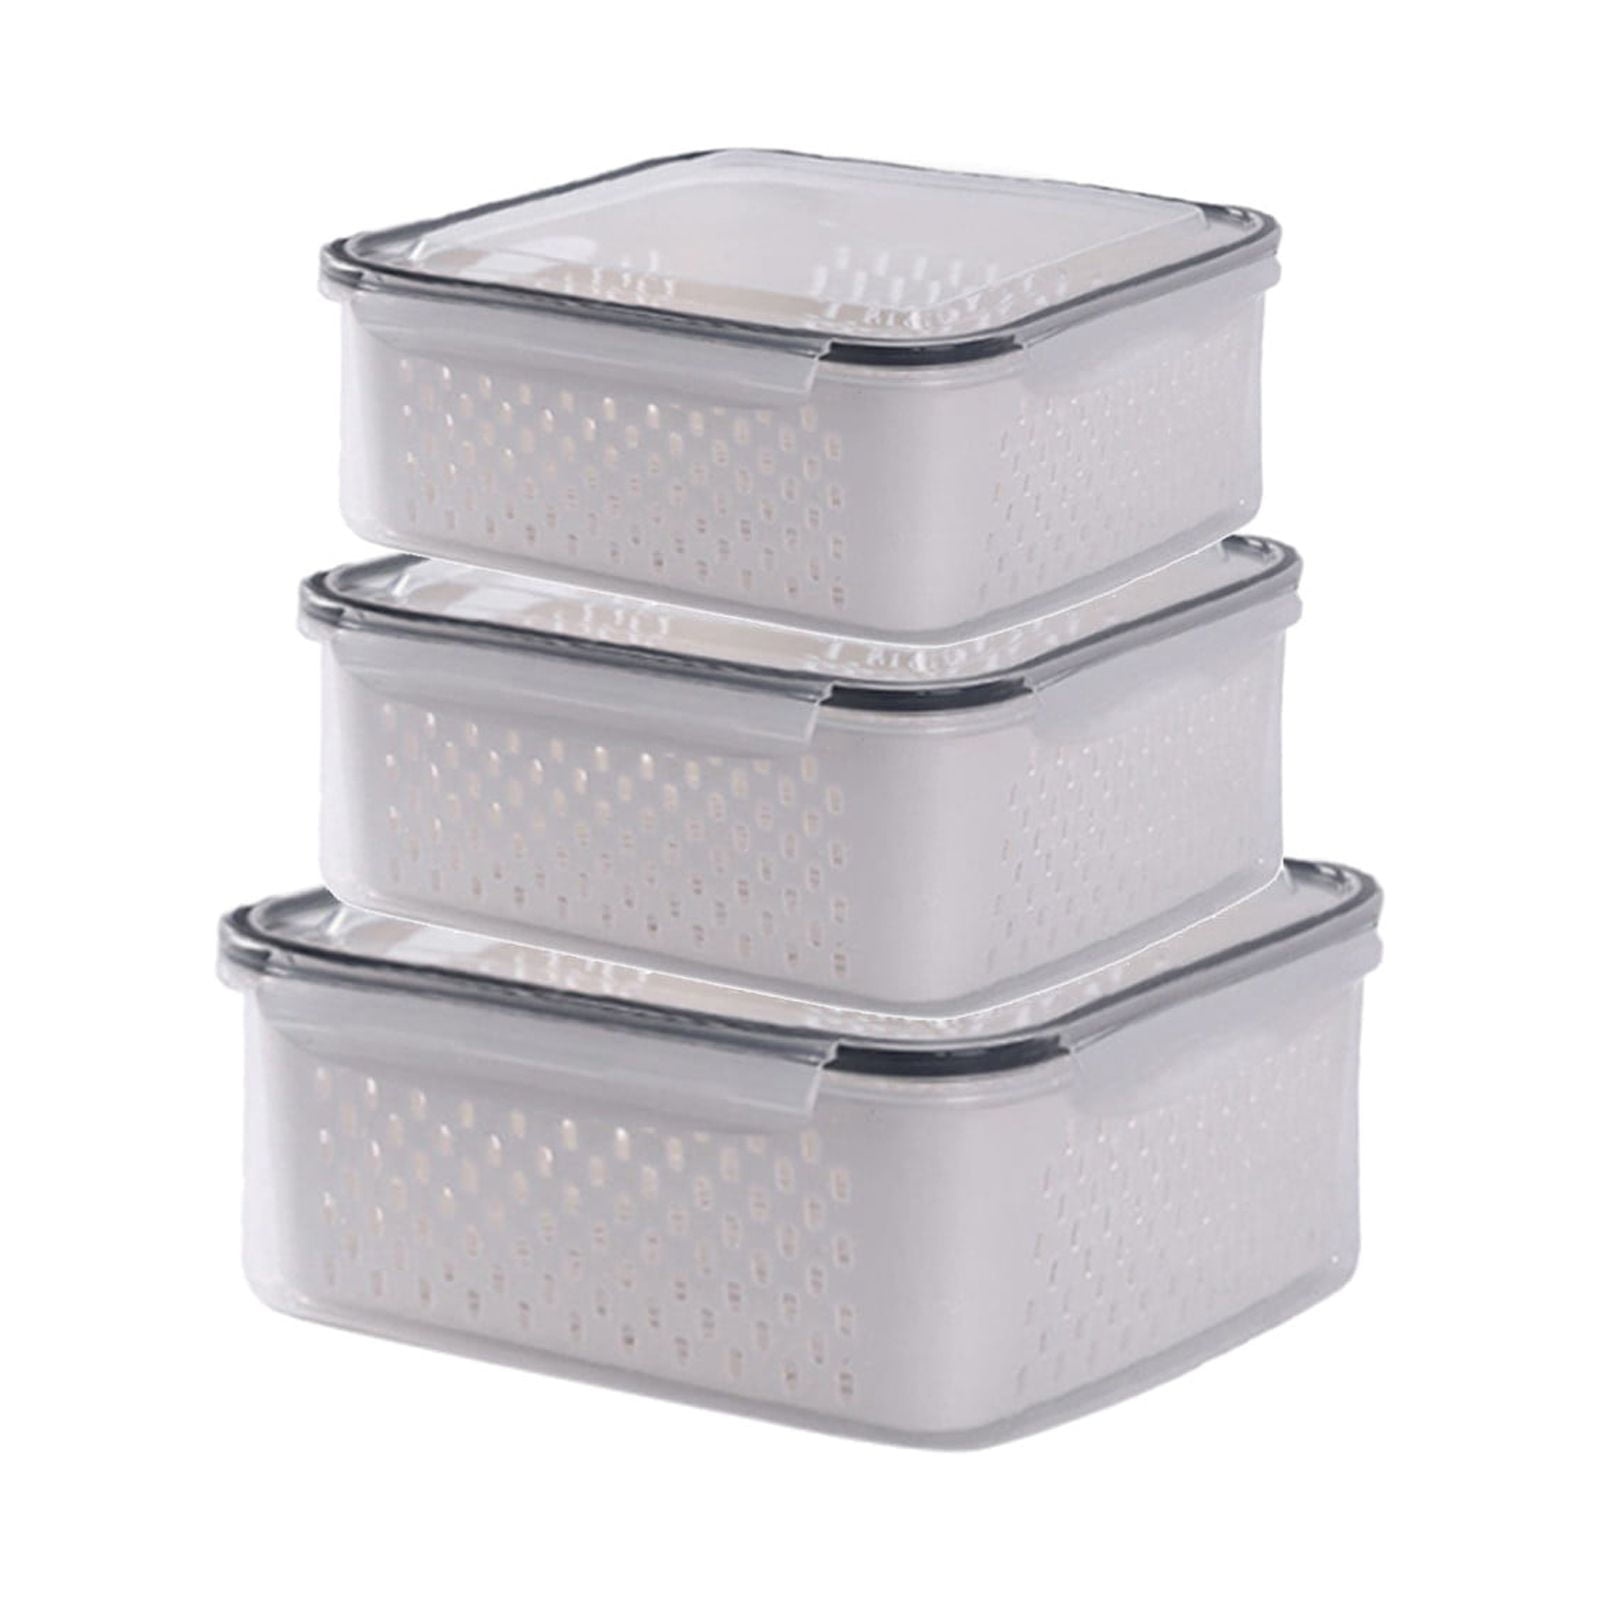 Mueller shelf liner, $3+, 3 produce storage containers, $4+